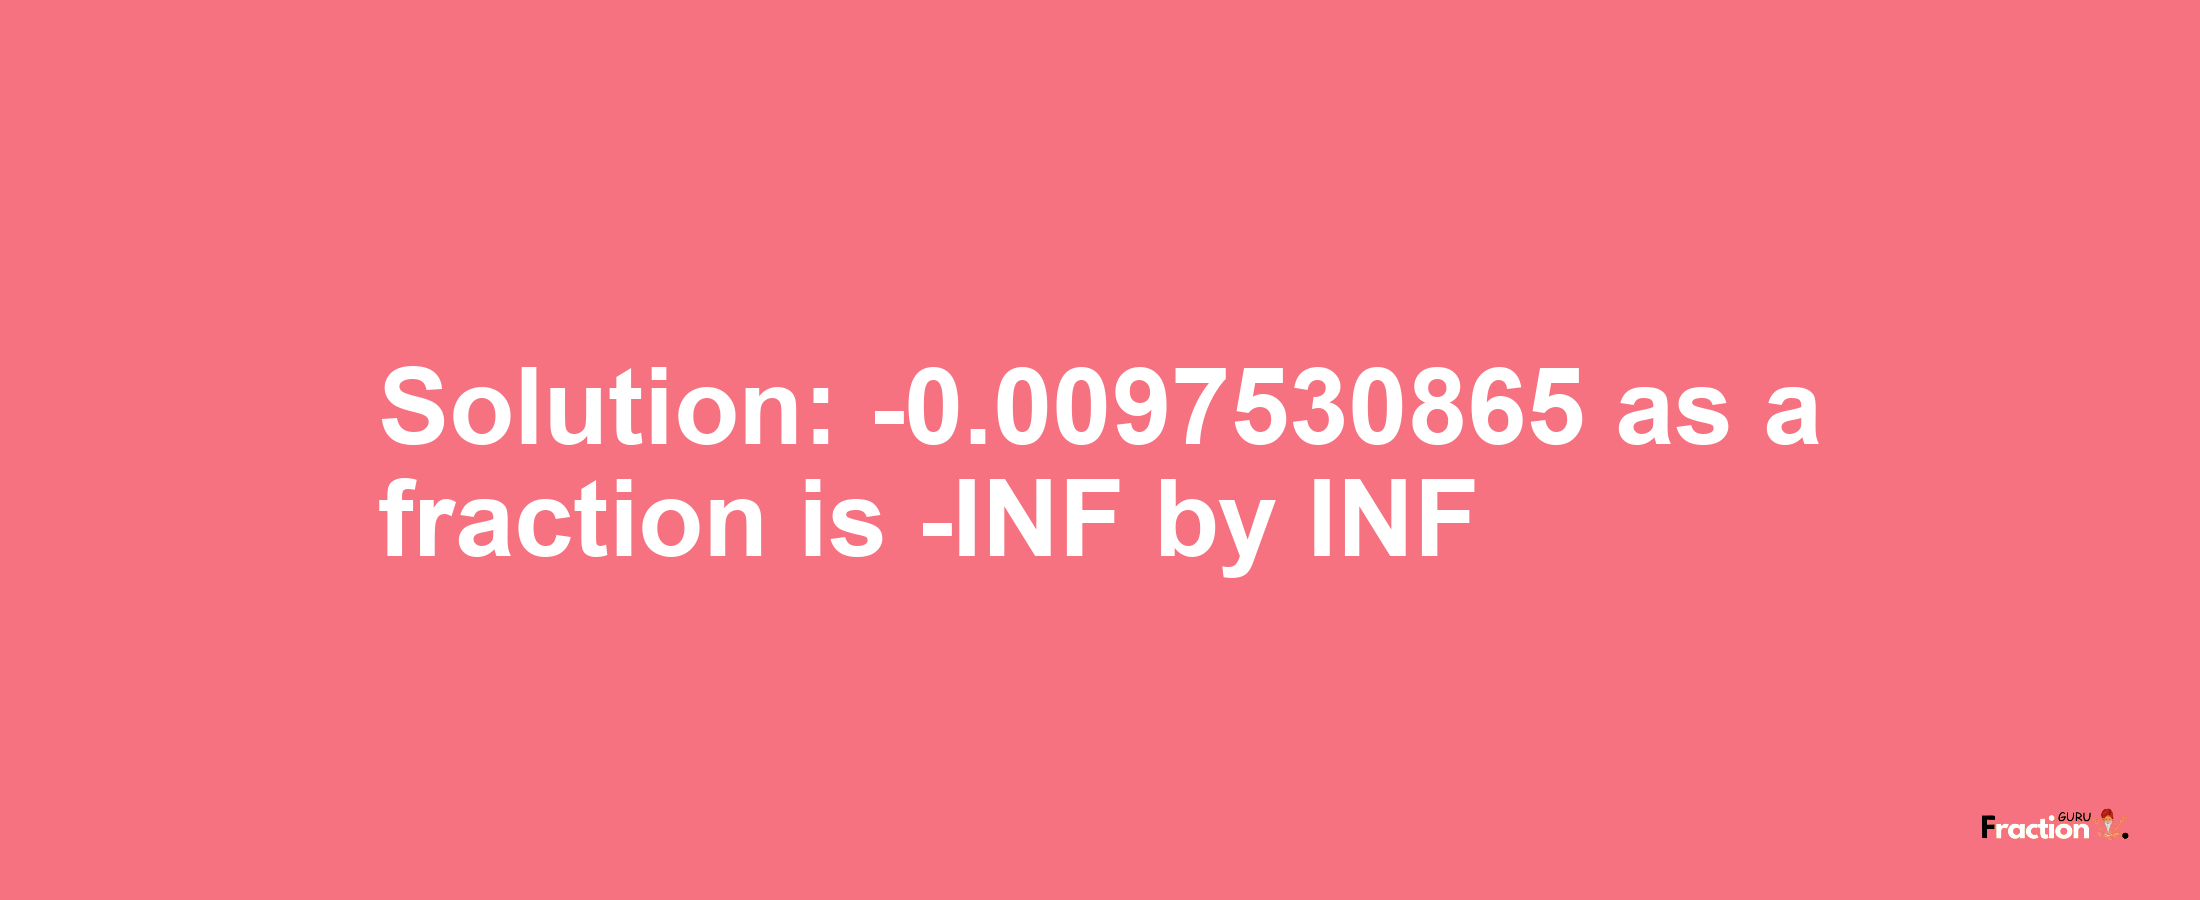 Solution:-0.0097530865 as a fraction is -INF/INF